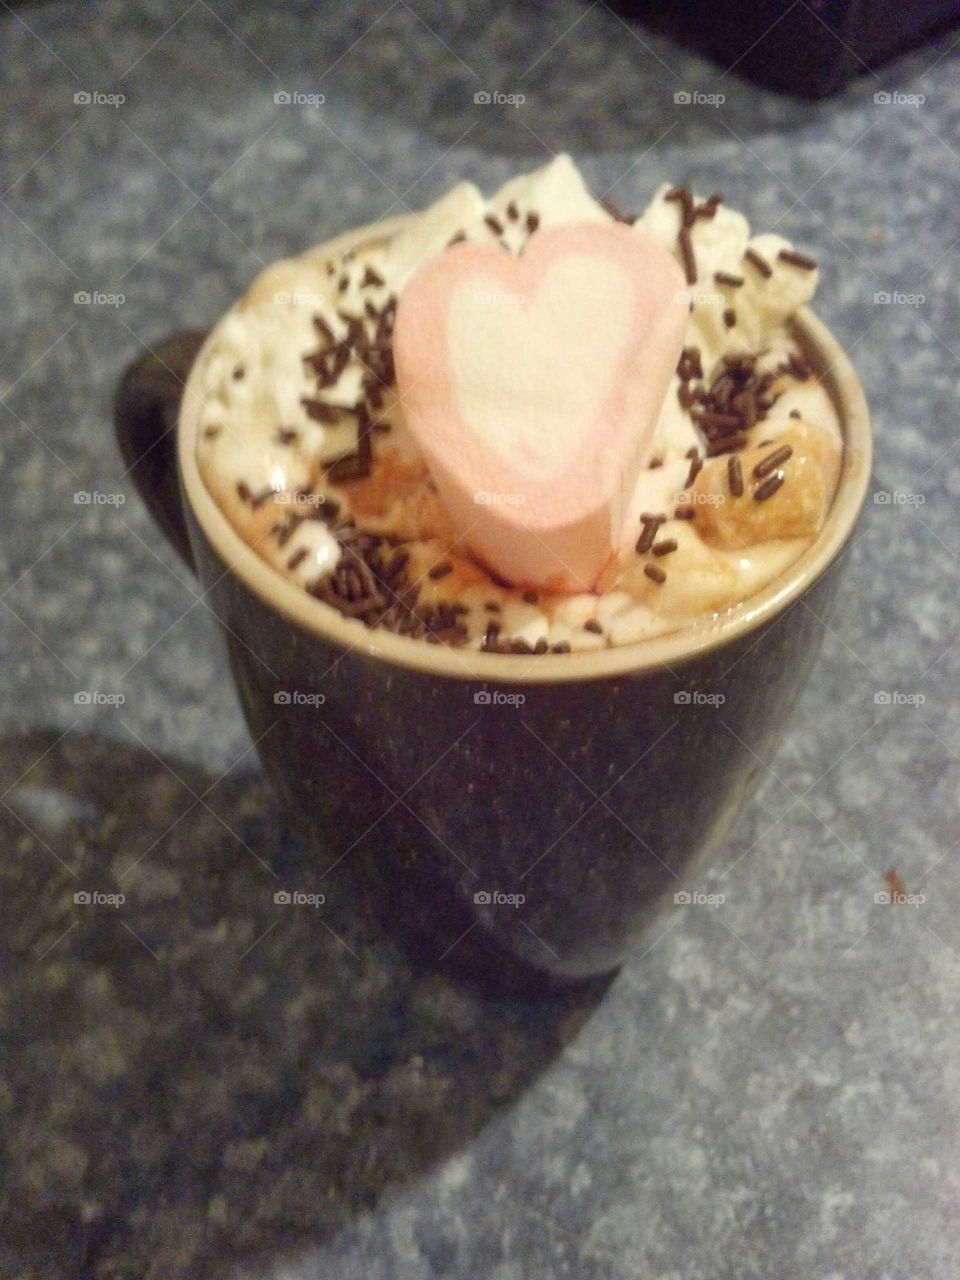 Love in a cup